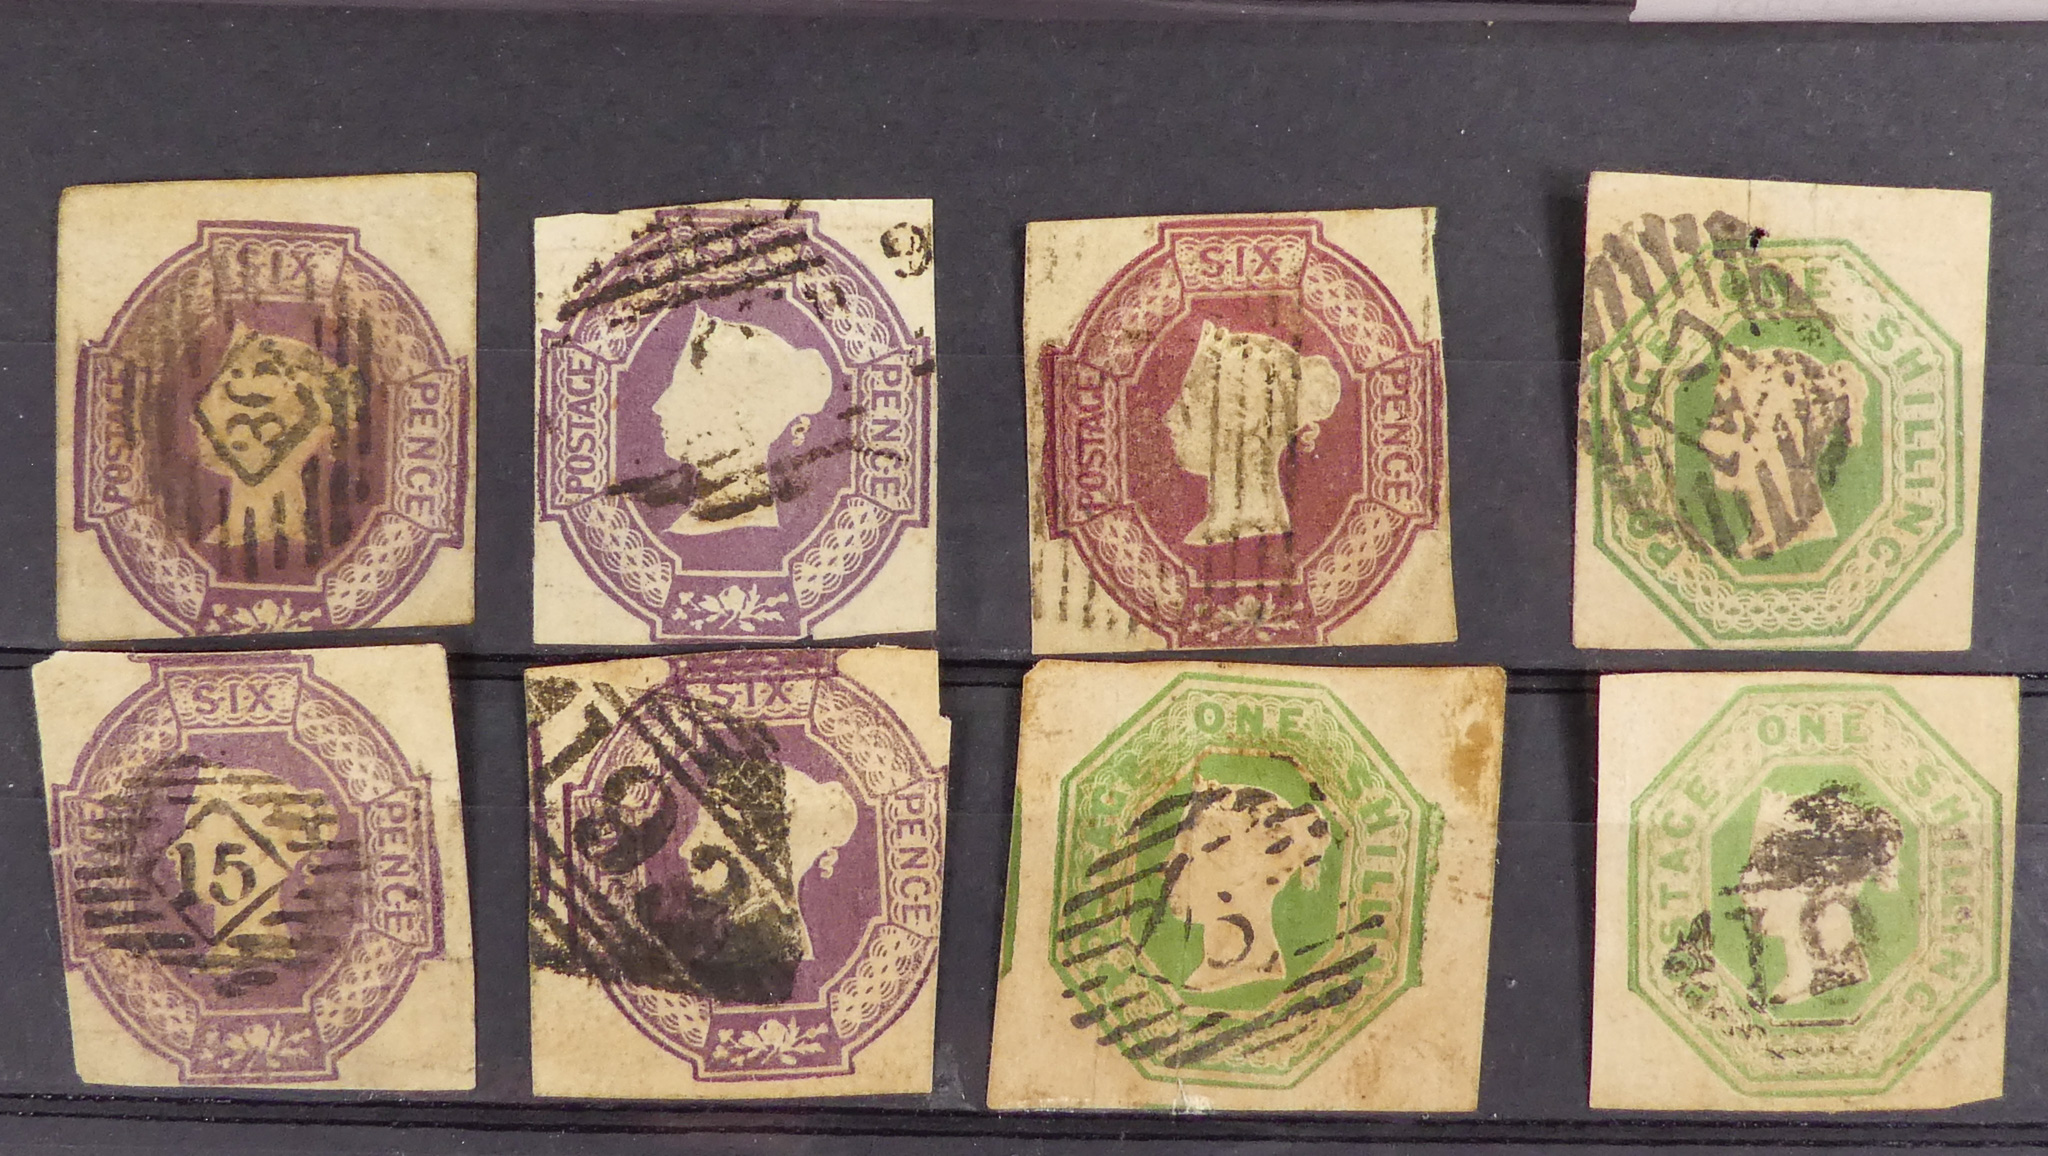 GB EMBOSED ISSUE 1847-54 - A selection of 6d mauve x 5 and 1/- green x 3 - some with faults. Very